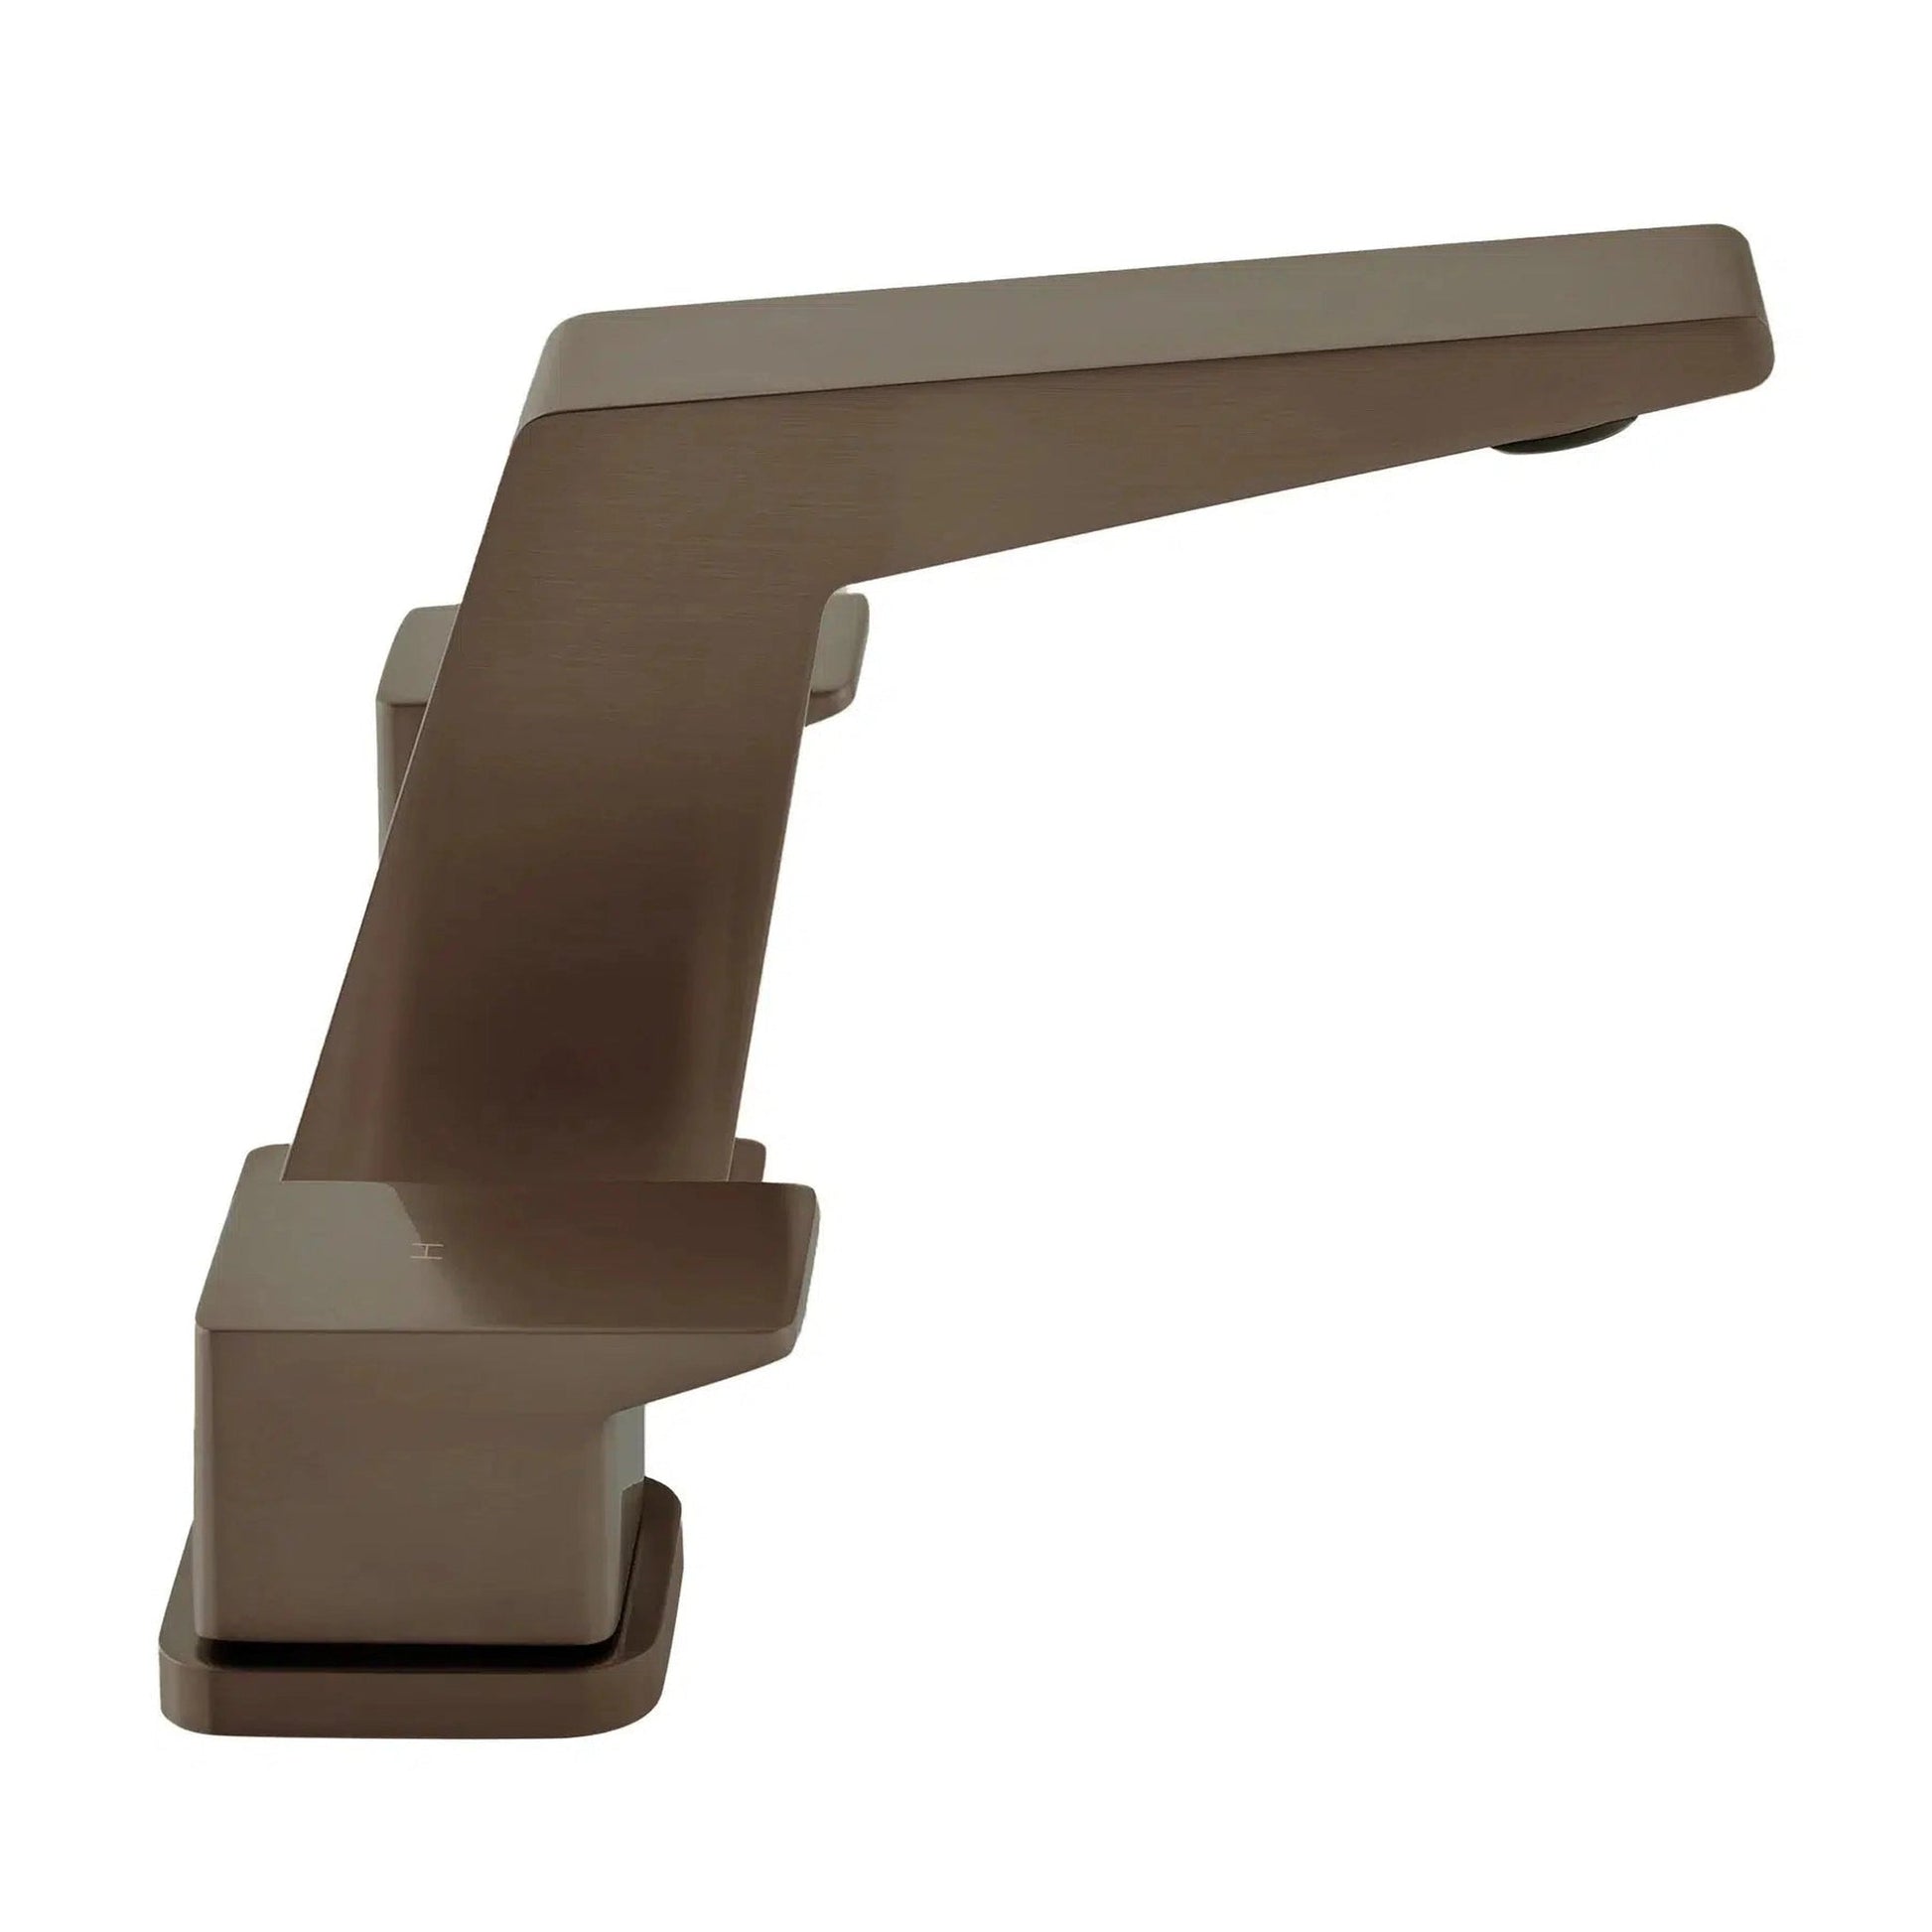 Swiss Madison Carré 8" Oil Rubbed Bronze Widespread Bathroom Faucet With Knob Handles and 1.2 GPM Flow Rate